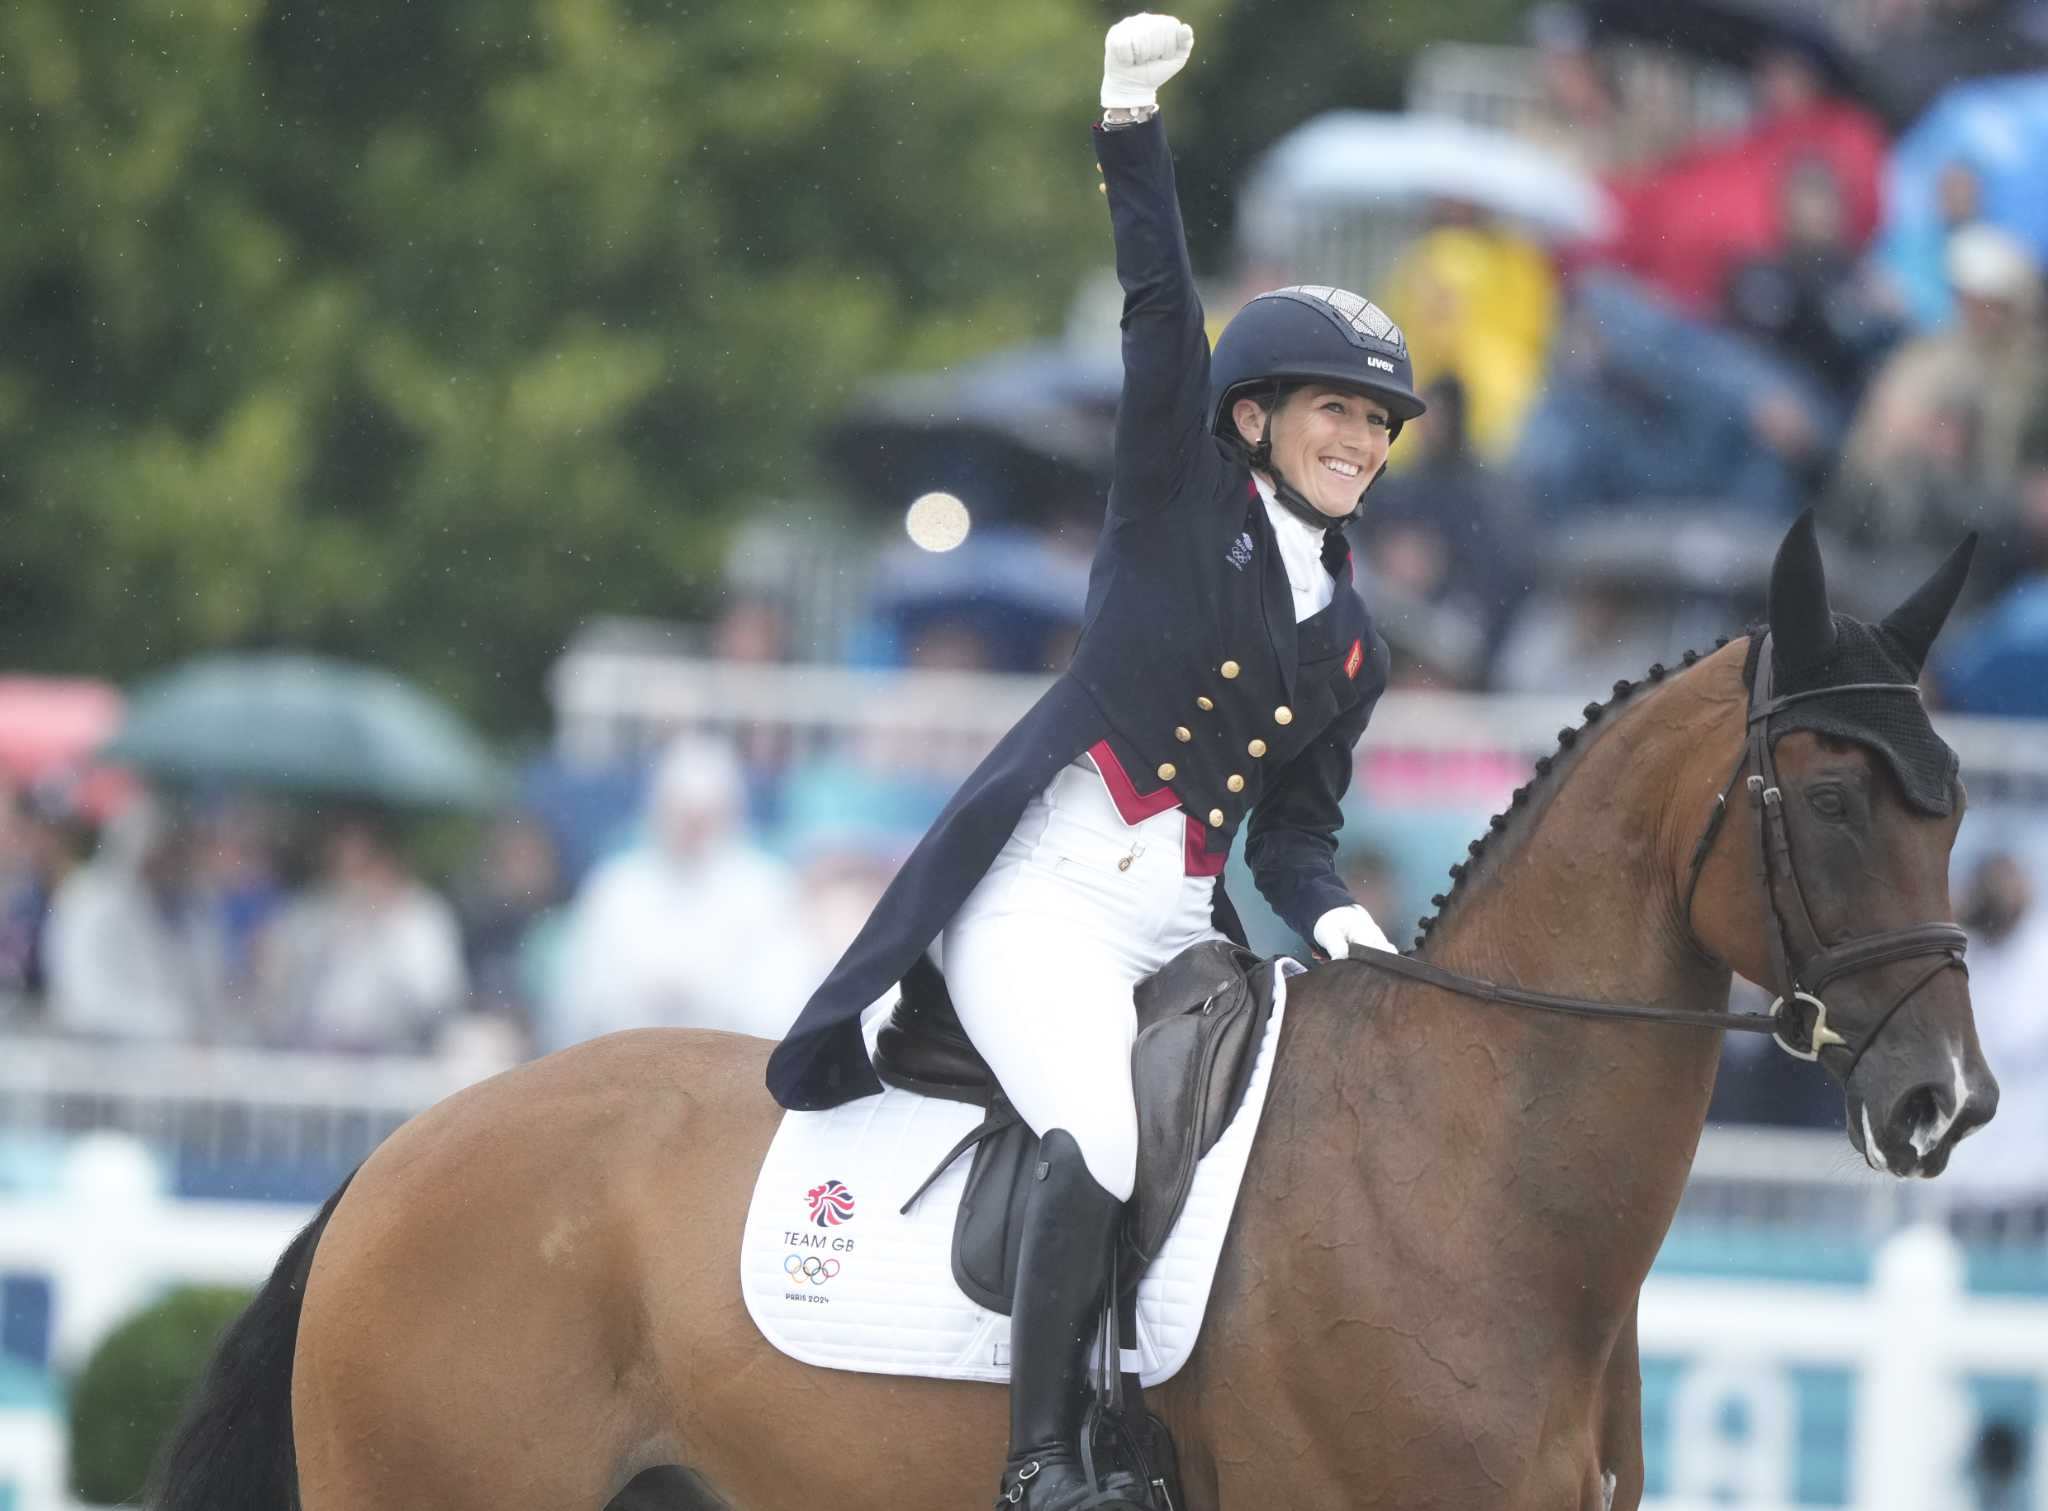 British rider Collett sets Olympic eventing record at Paris Games with best dressage score